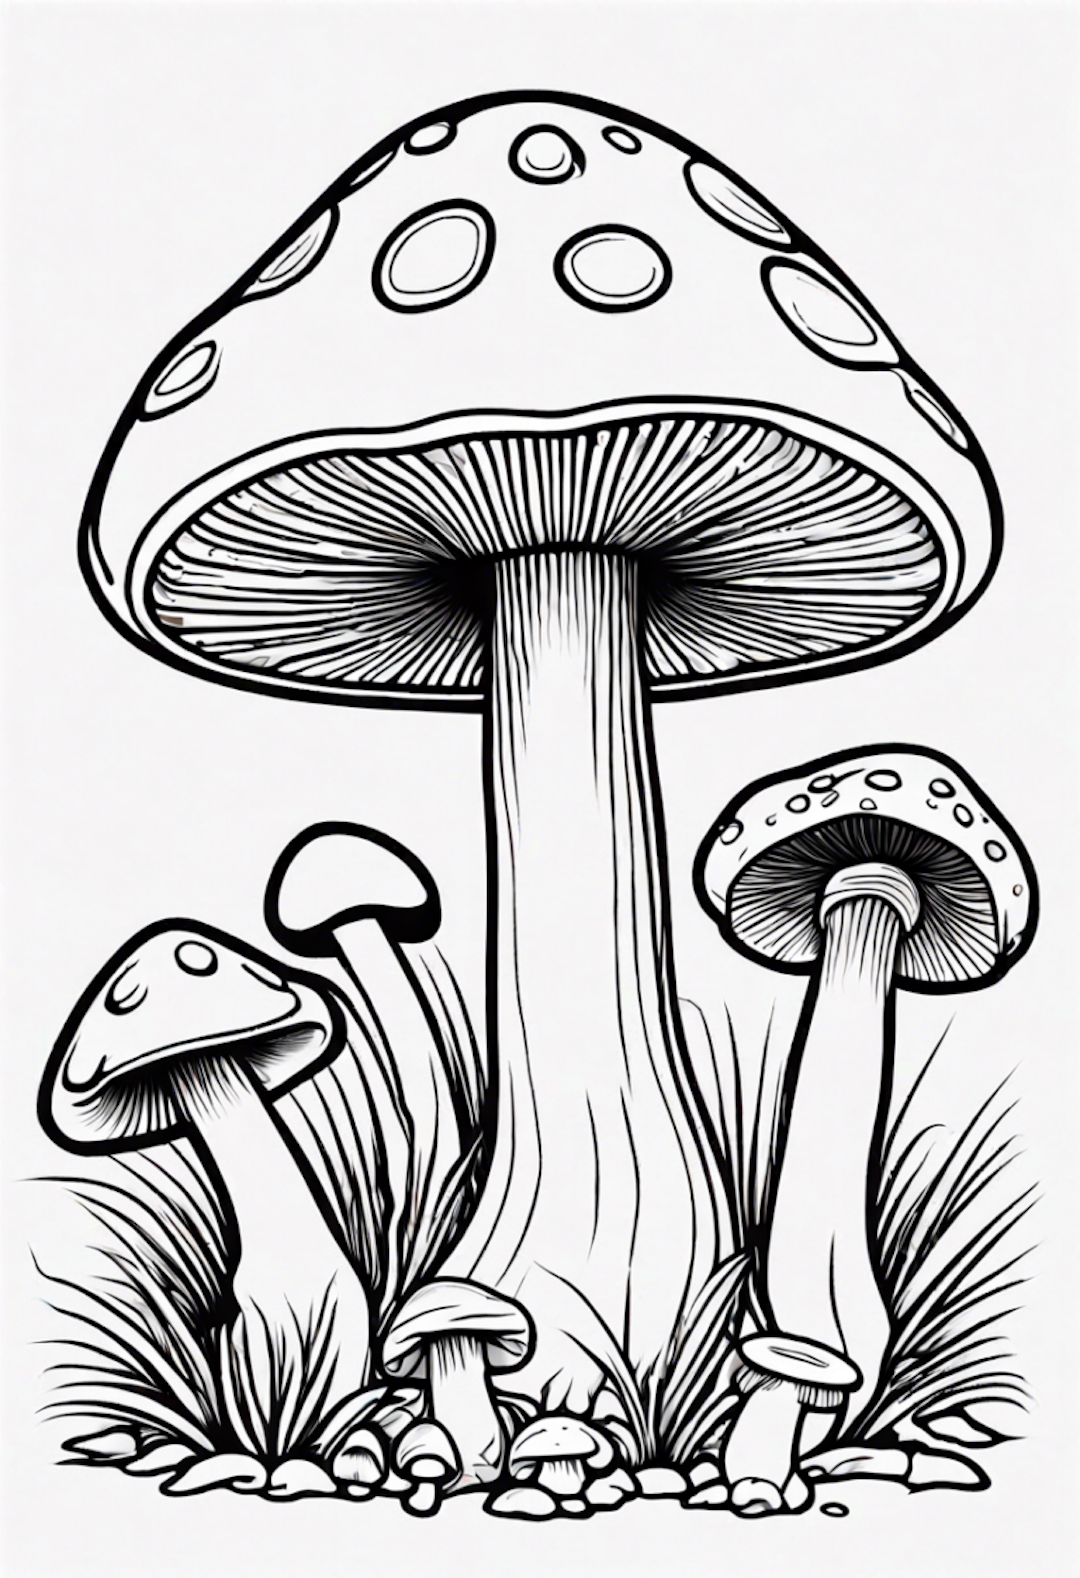 Enchanted Forest Mushrooms coloring pages